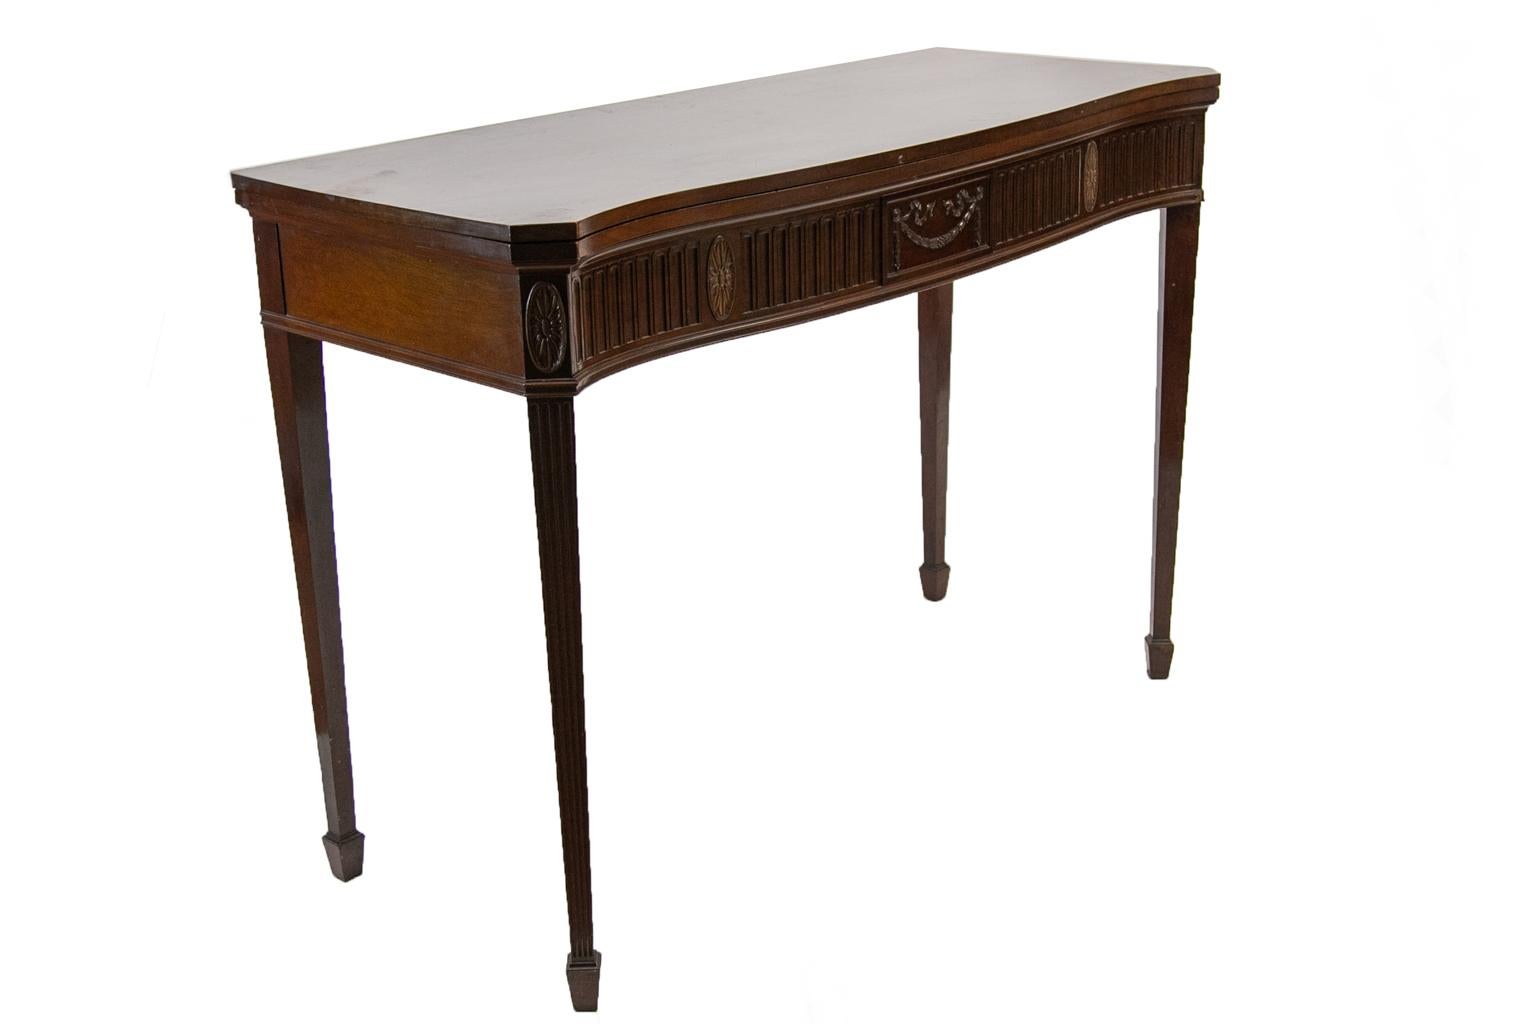 English Mahogany Serpentine Hepplewhite Console Table or Server For Sale 1